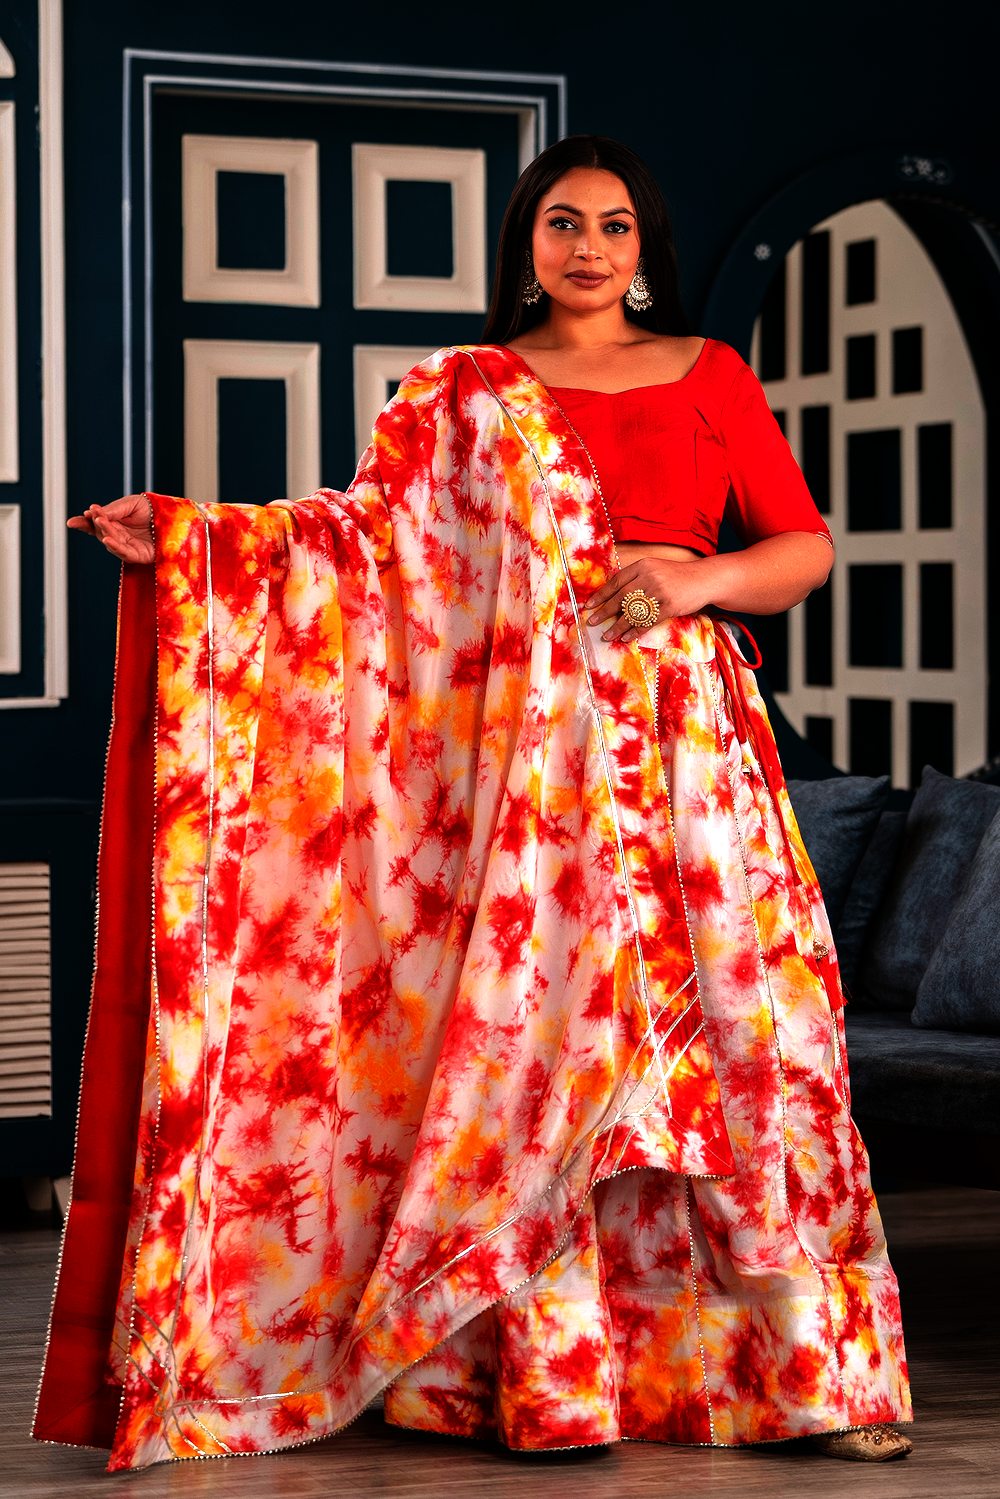 Plus Size Dresses for sale in Chandigarh, India